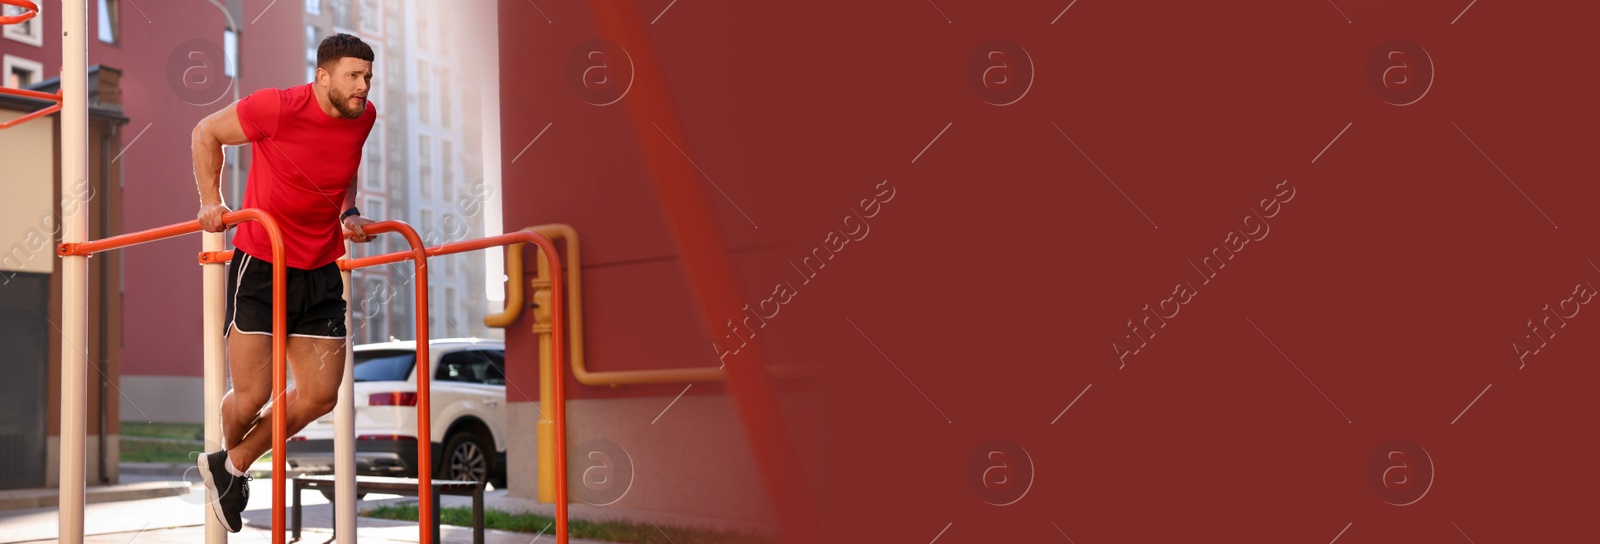 Image of Handsome man training on parallel bars at outdoor gym, space for text. Banner design